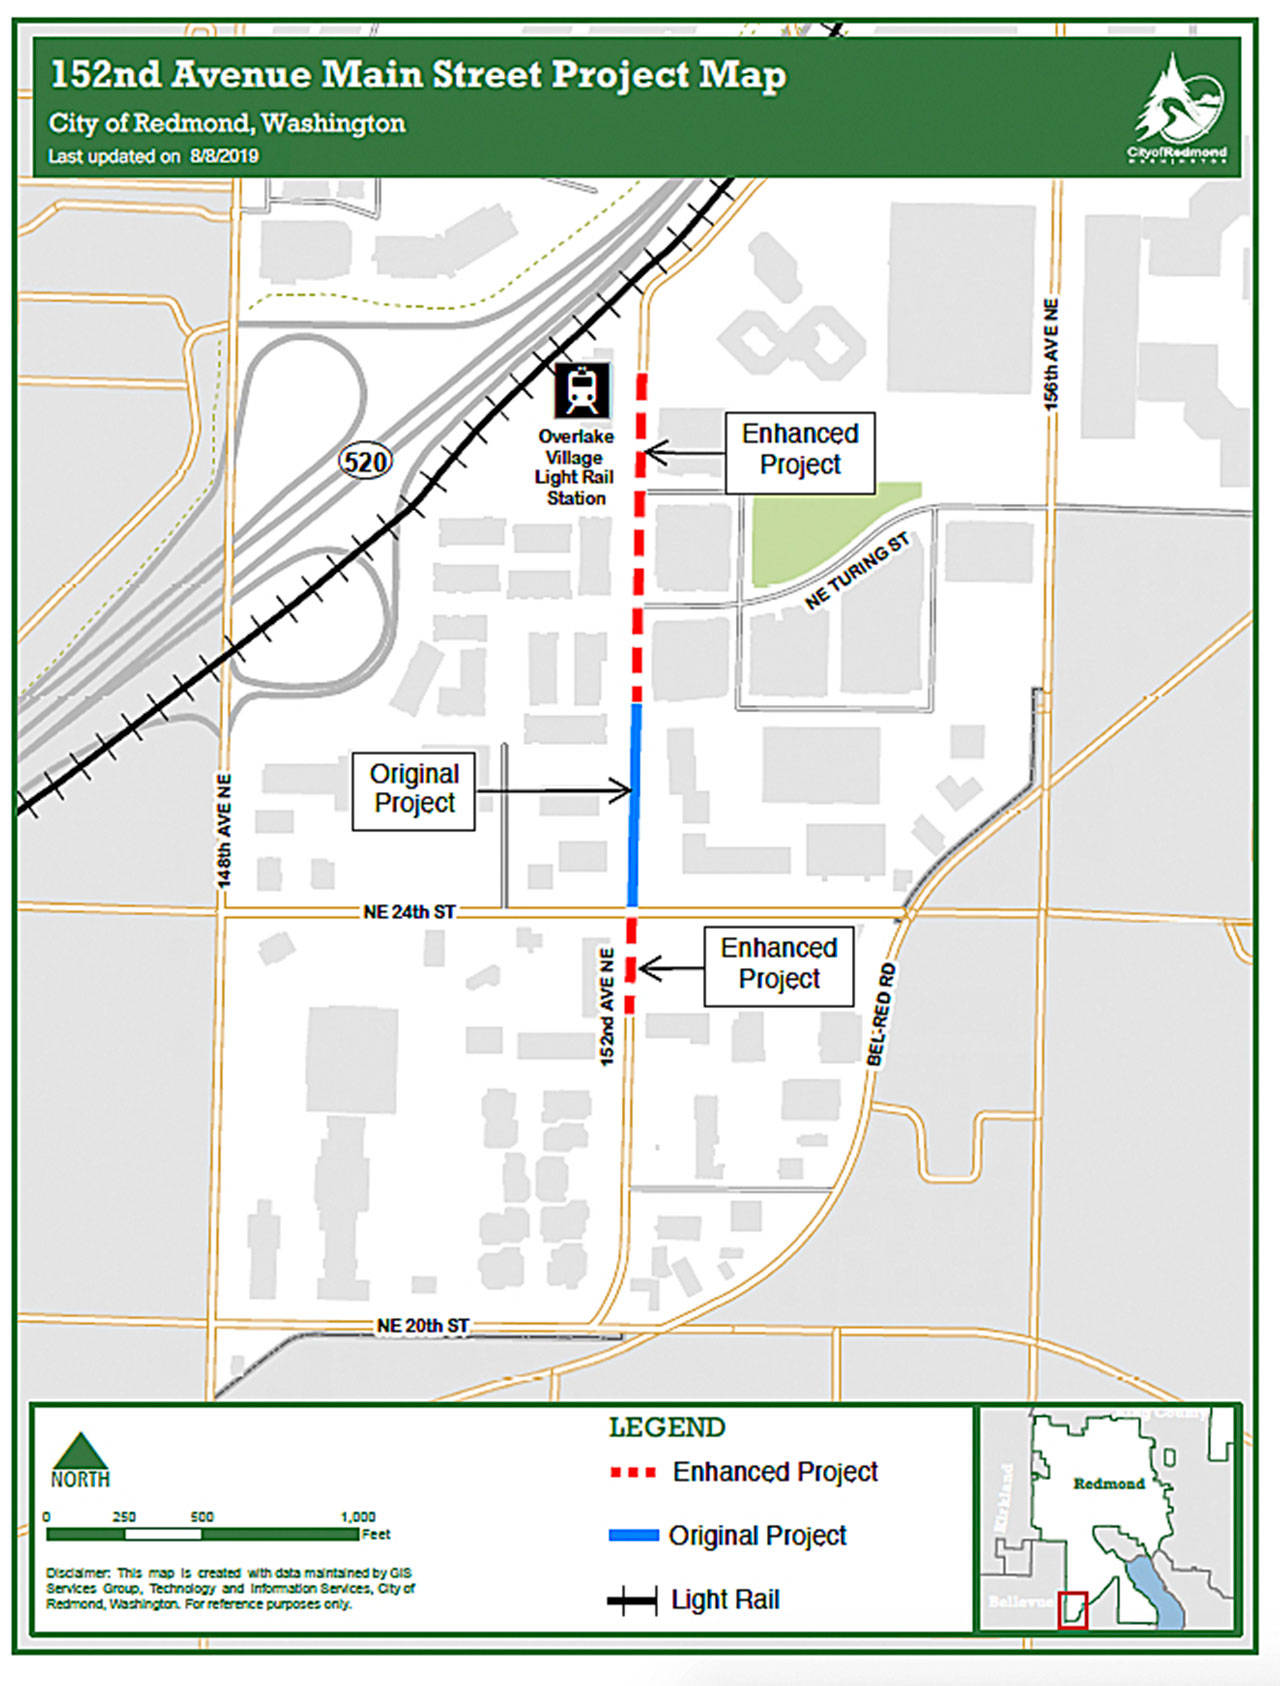 152nd Avenue Northeast main street project map. Image courtesy of city of Redmond